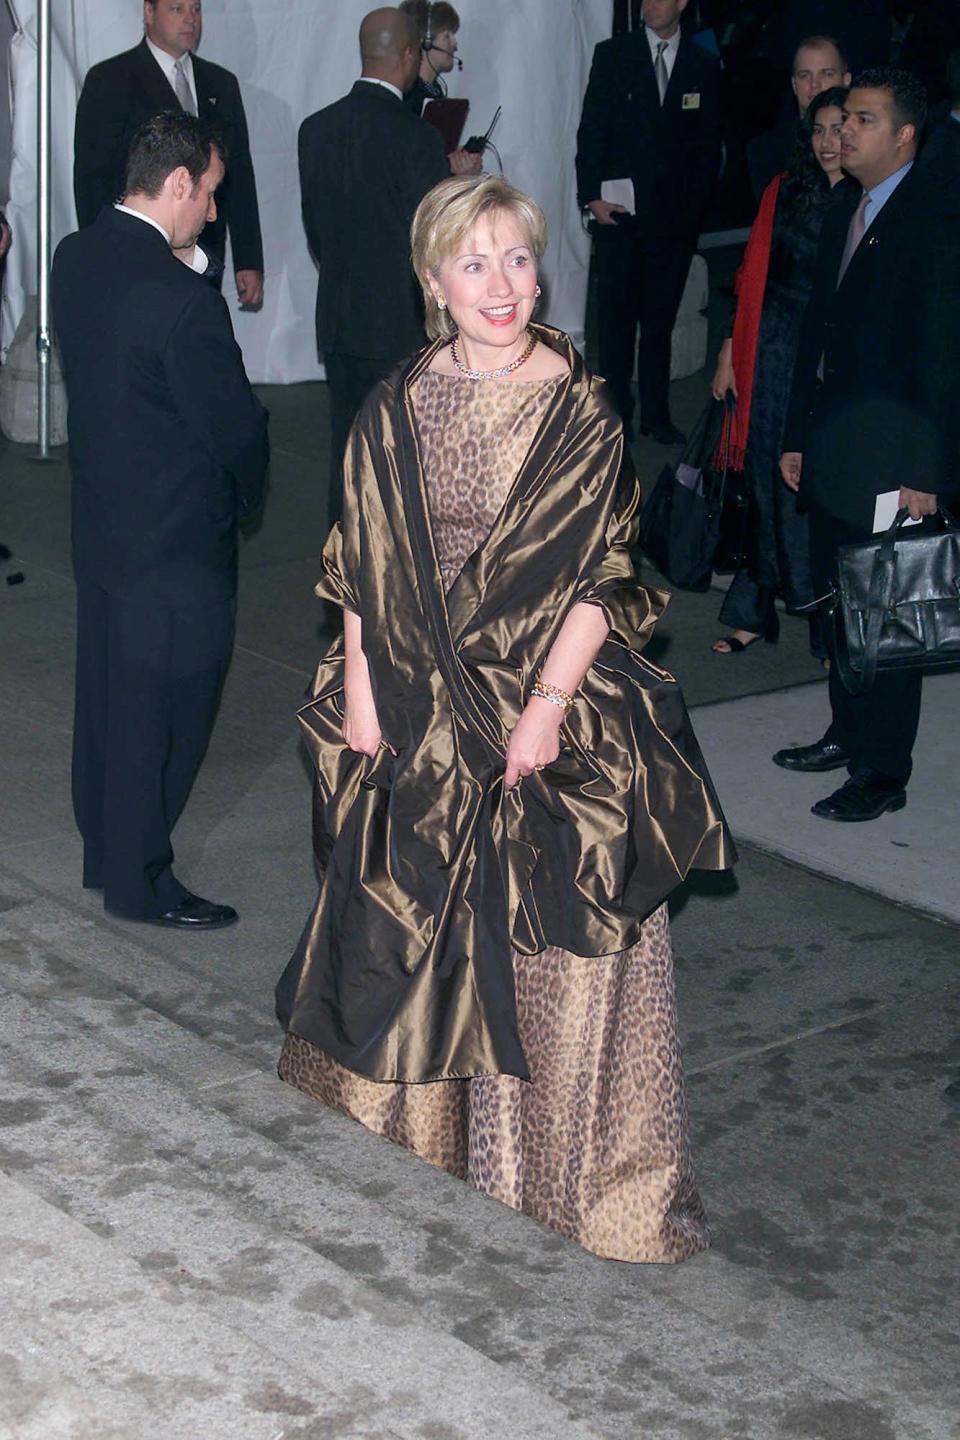 Hillary Clinton, dressed in a cheetah-print gown with a bronze shawl draped around her shoulders, enters the Met Gala in 2001.